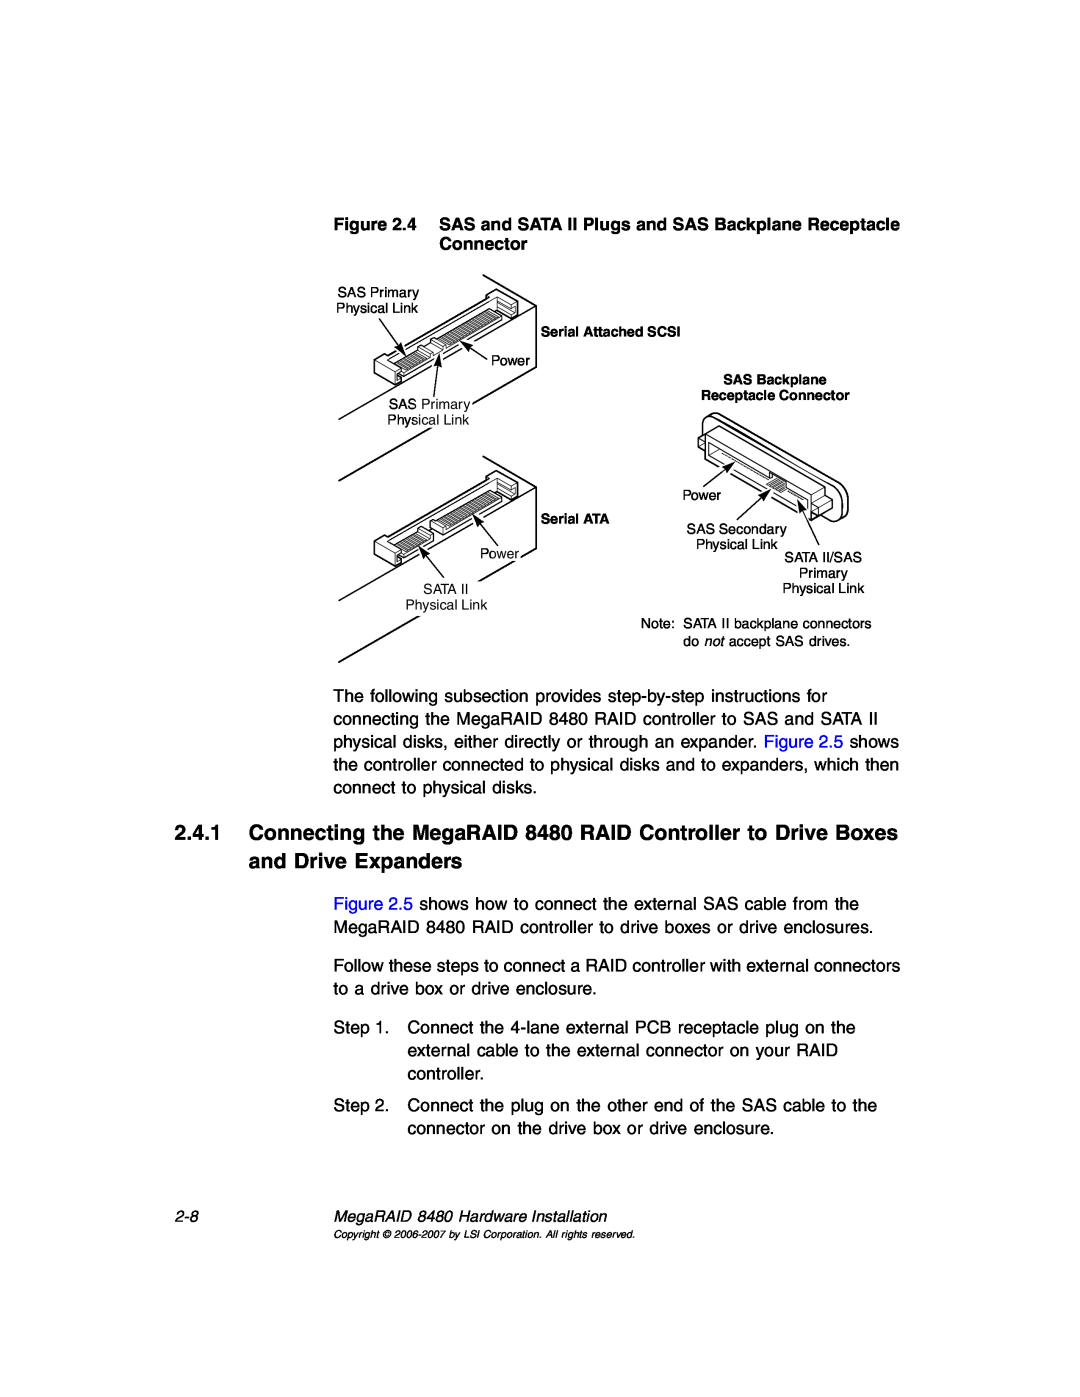 IBM MegaRAID 8480 manual 5 shows how to connect the external SAS cable from the 